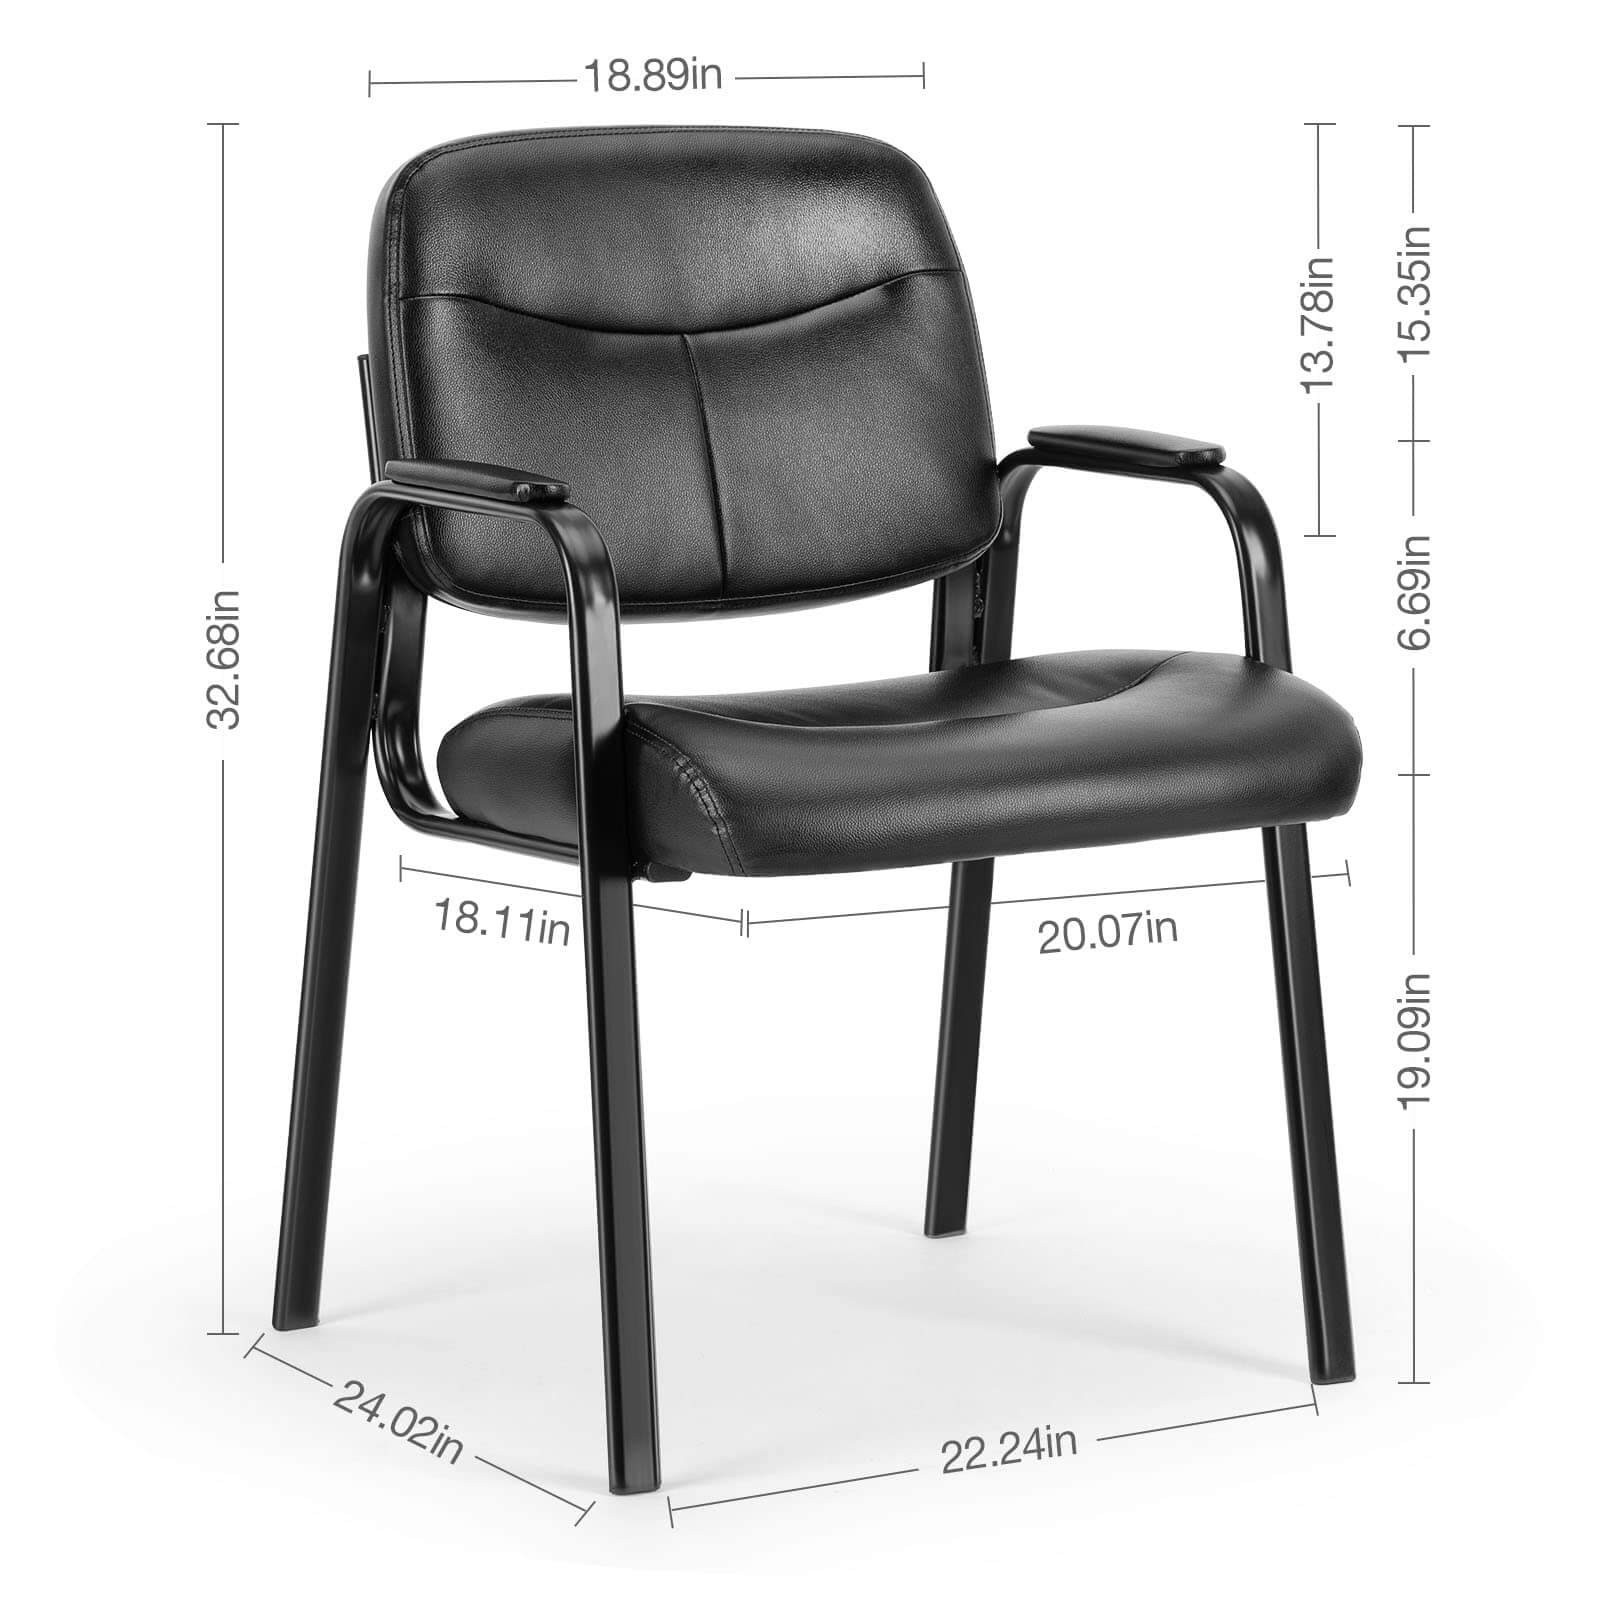 leather-office-chairs#Quantity_2-PACK